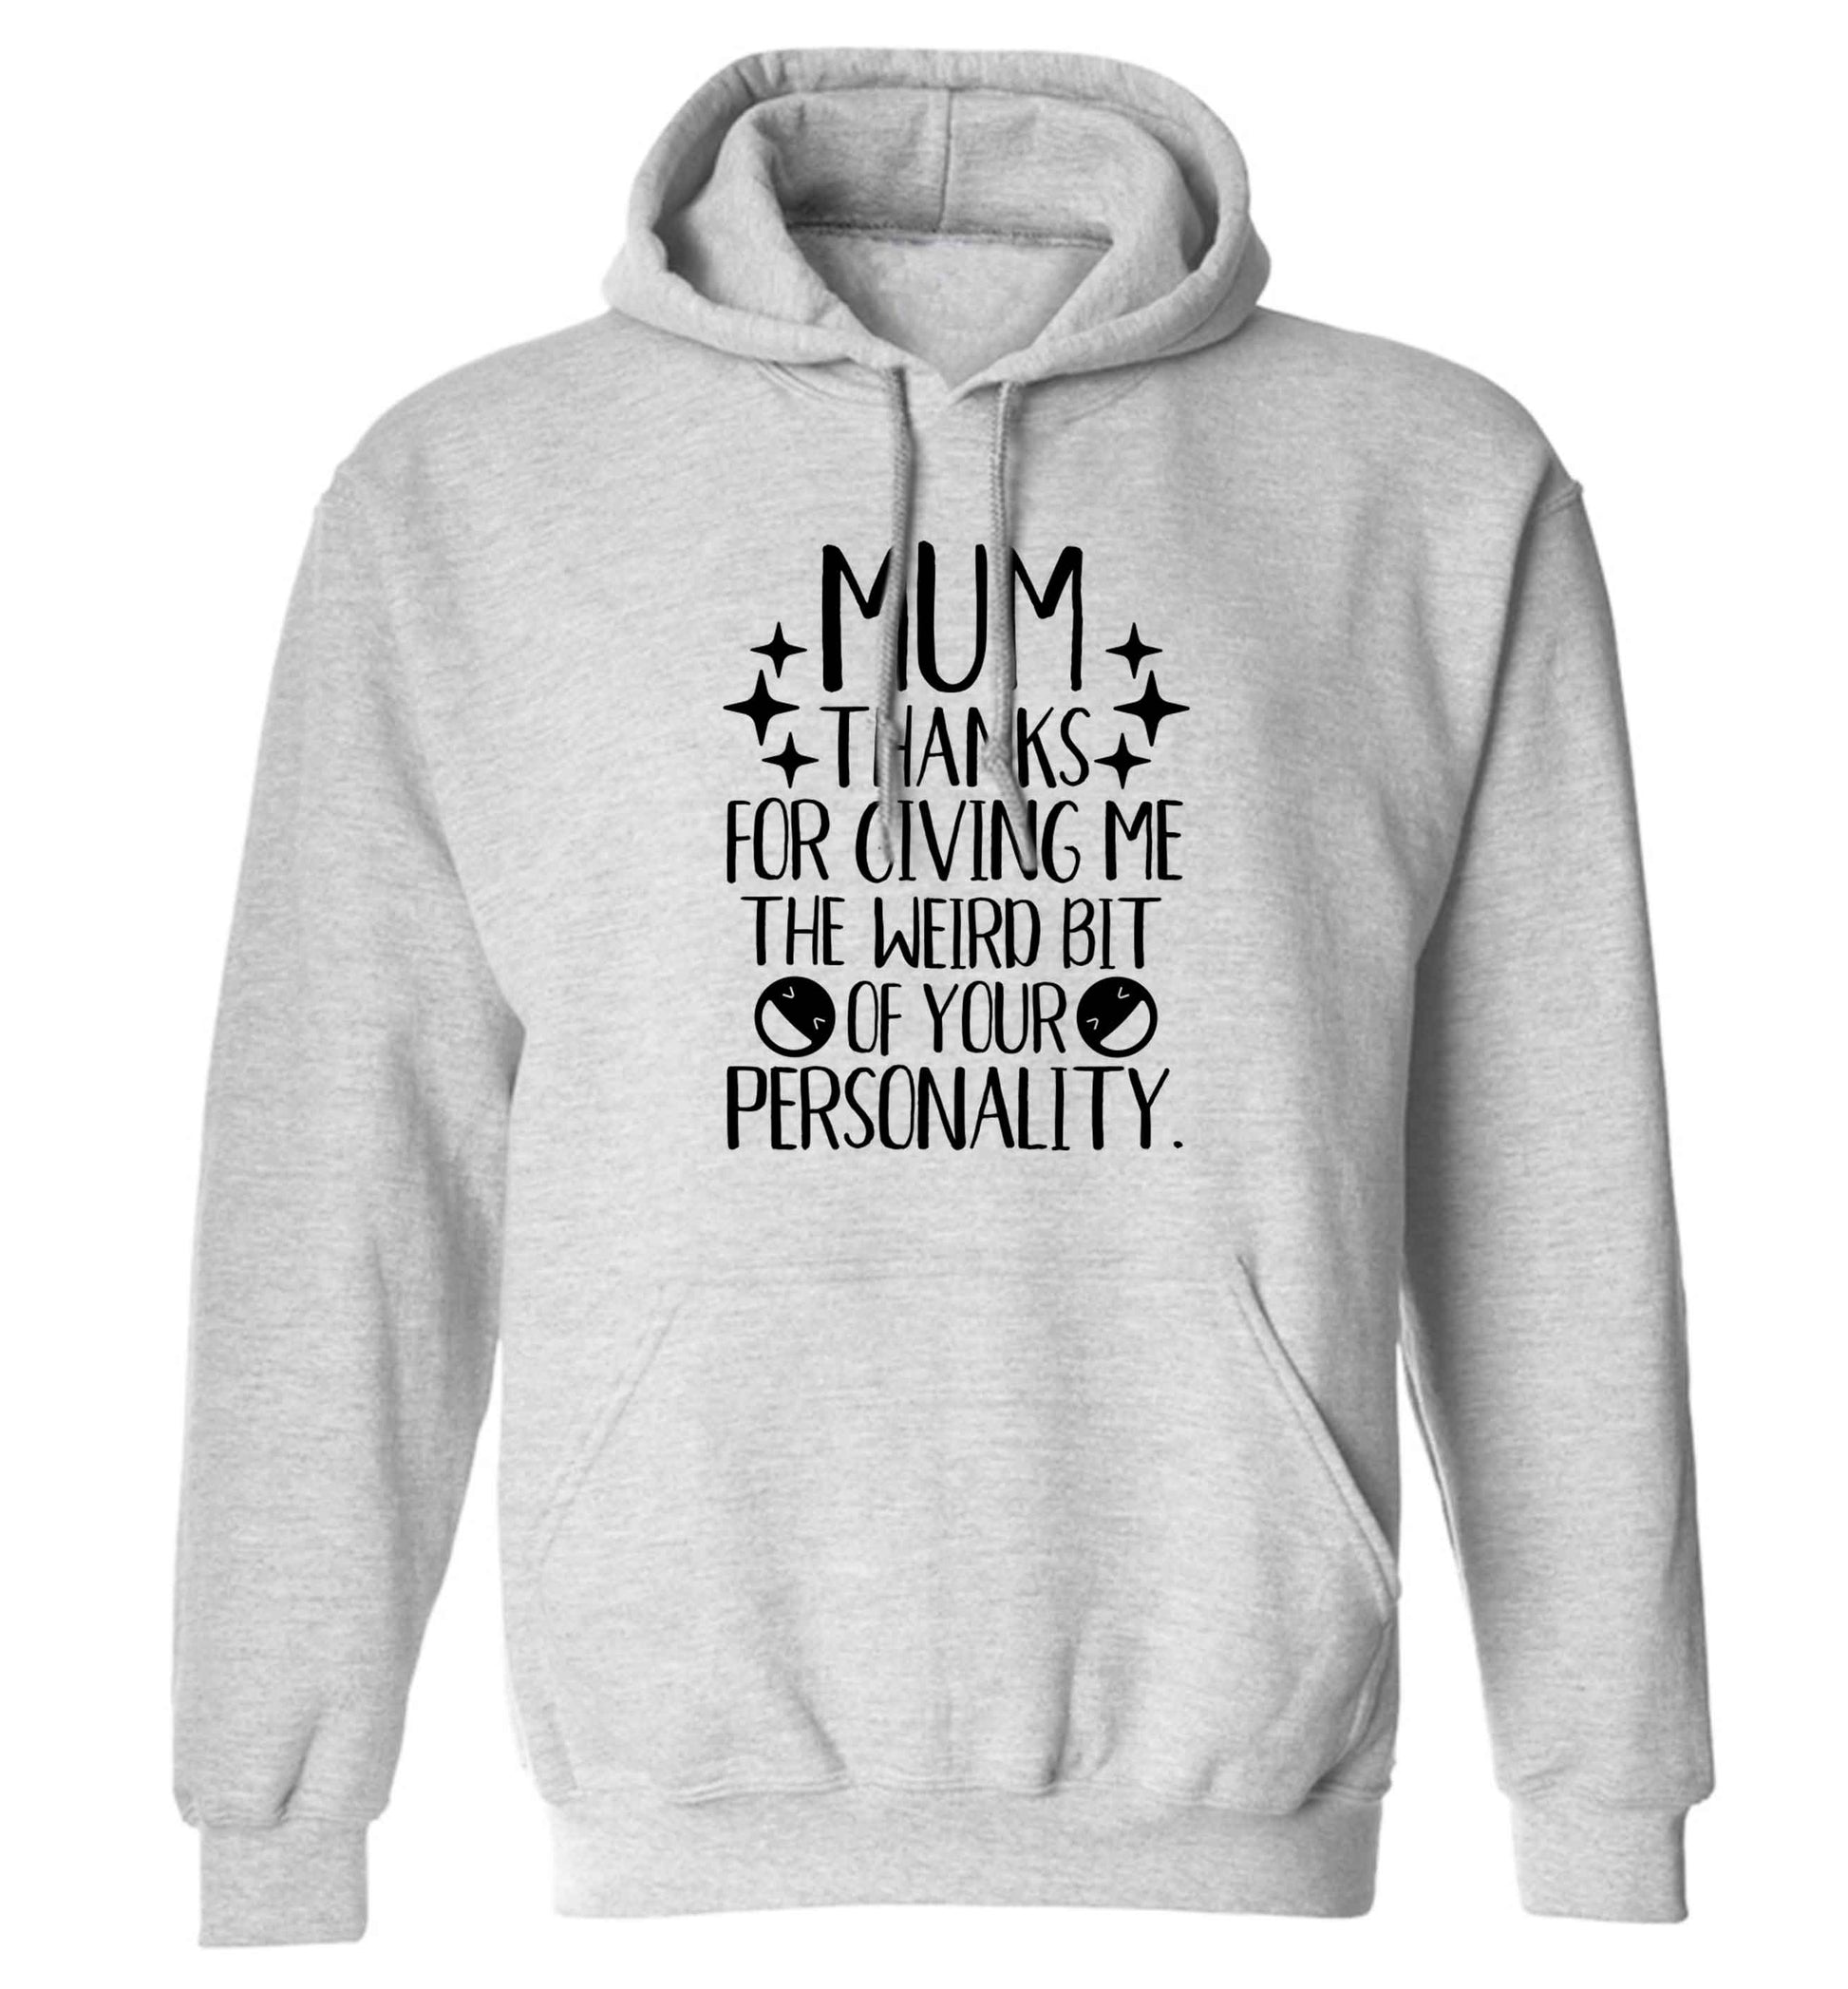 Mum, I love you more than halloumi and if you know me at all you know how deep that is adults unisex grey hoodie 2XL